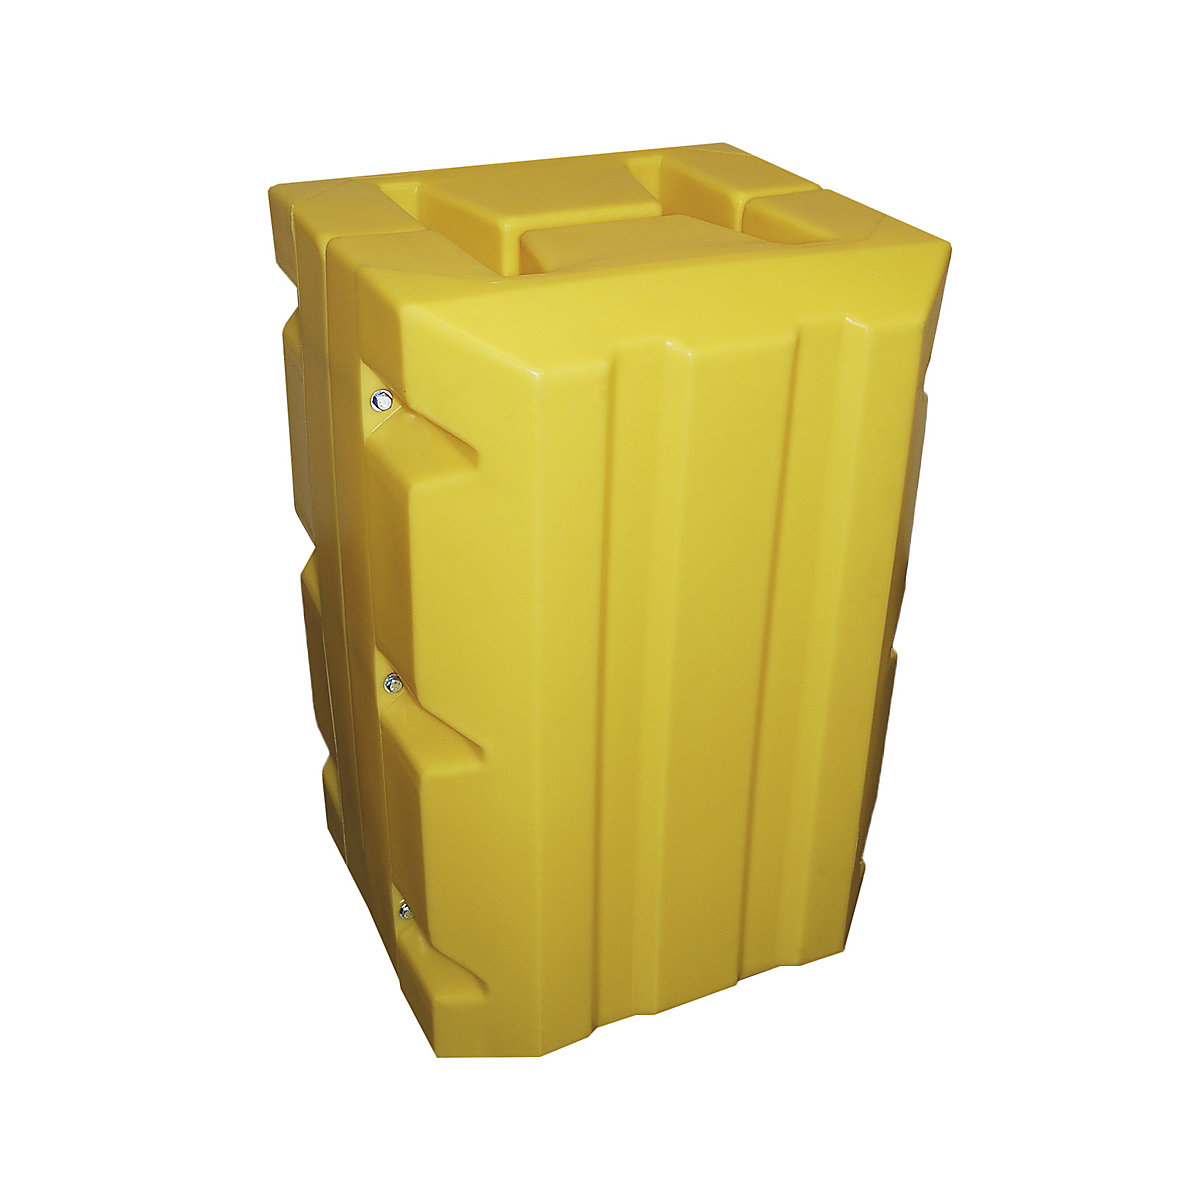 Column and post guard, made of polyethylene, yellow, LxWxH 695 x 640 x 1000 mm, internal dimensions 390 x 410 mm-4